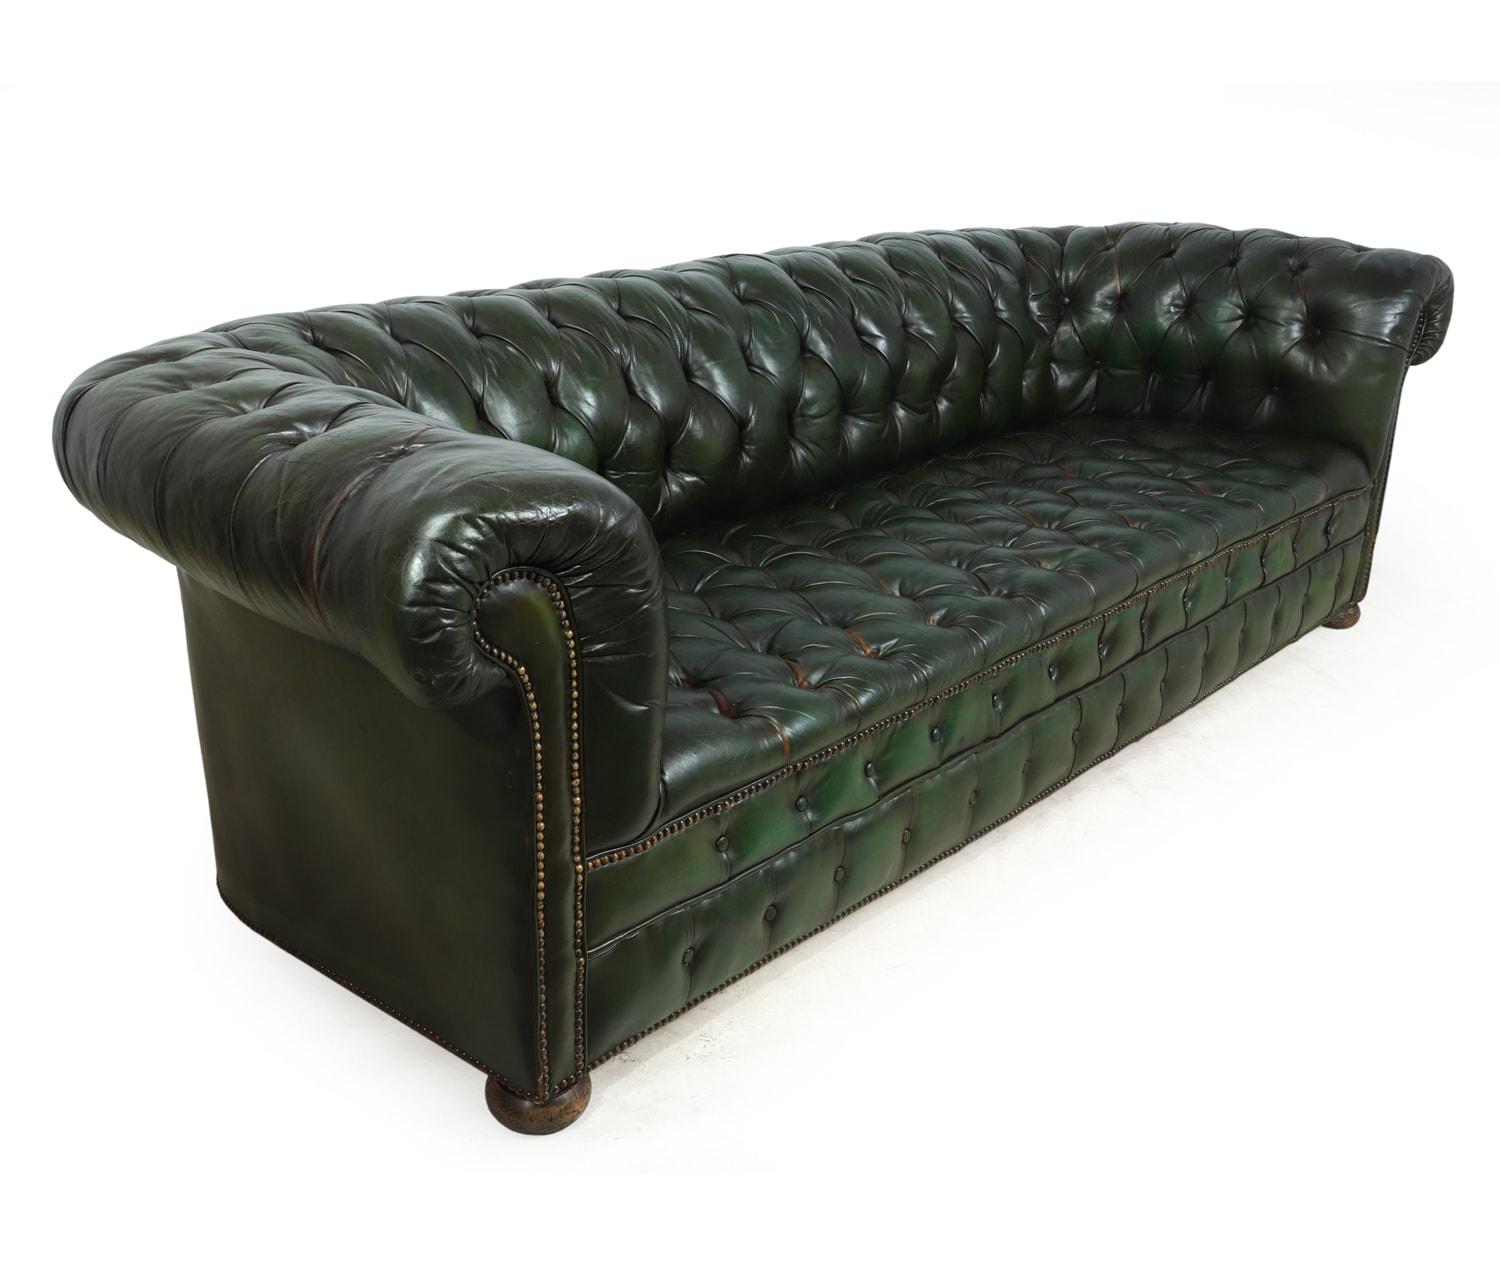 European Vintage Green Leather Chesterfield